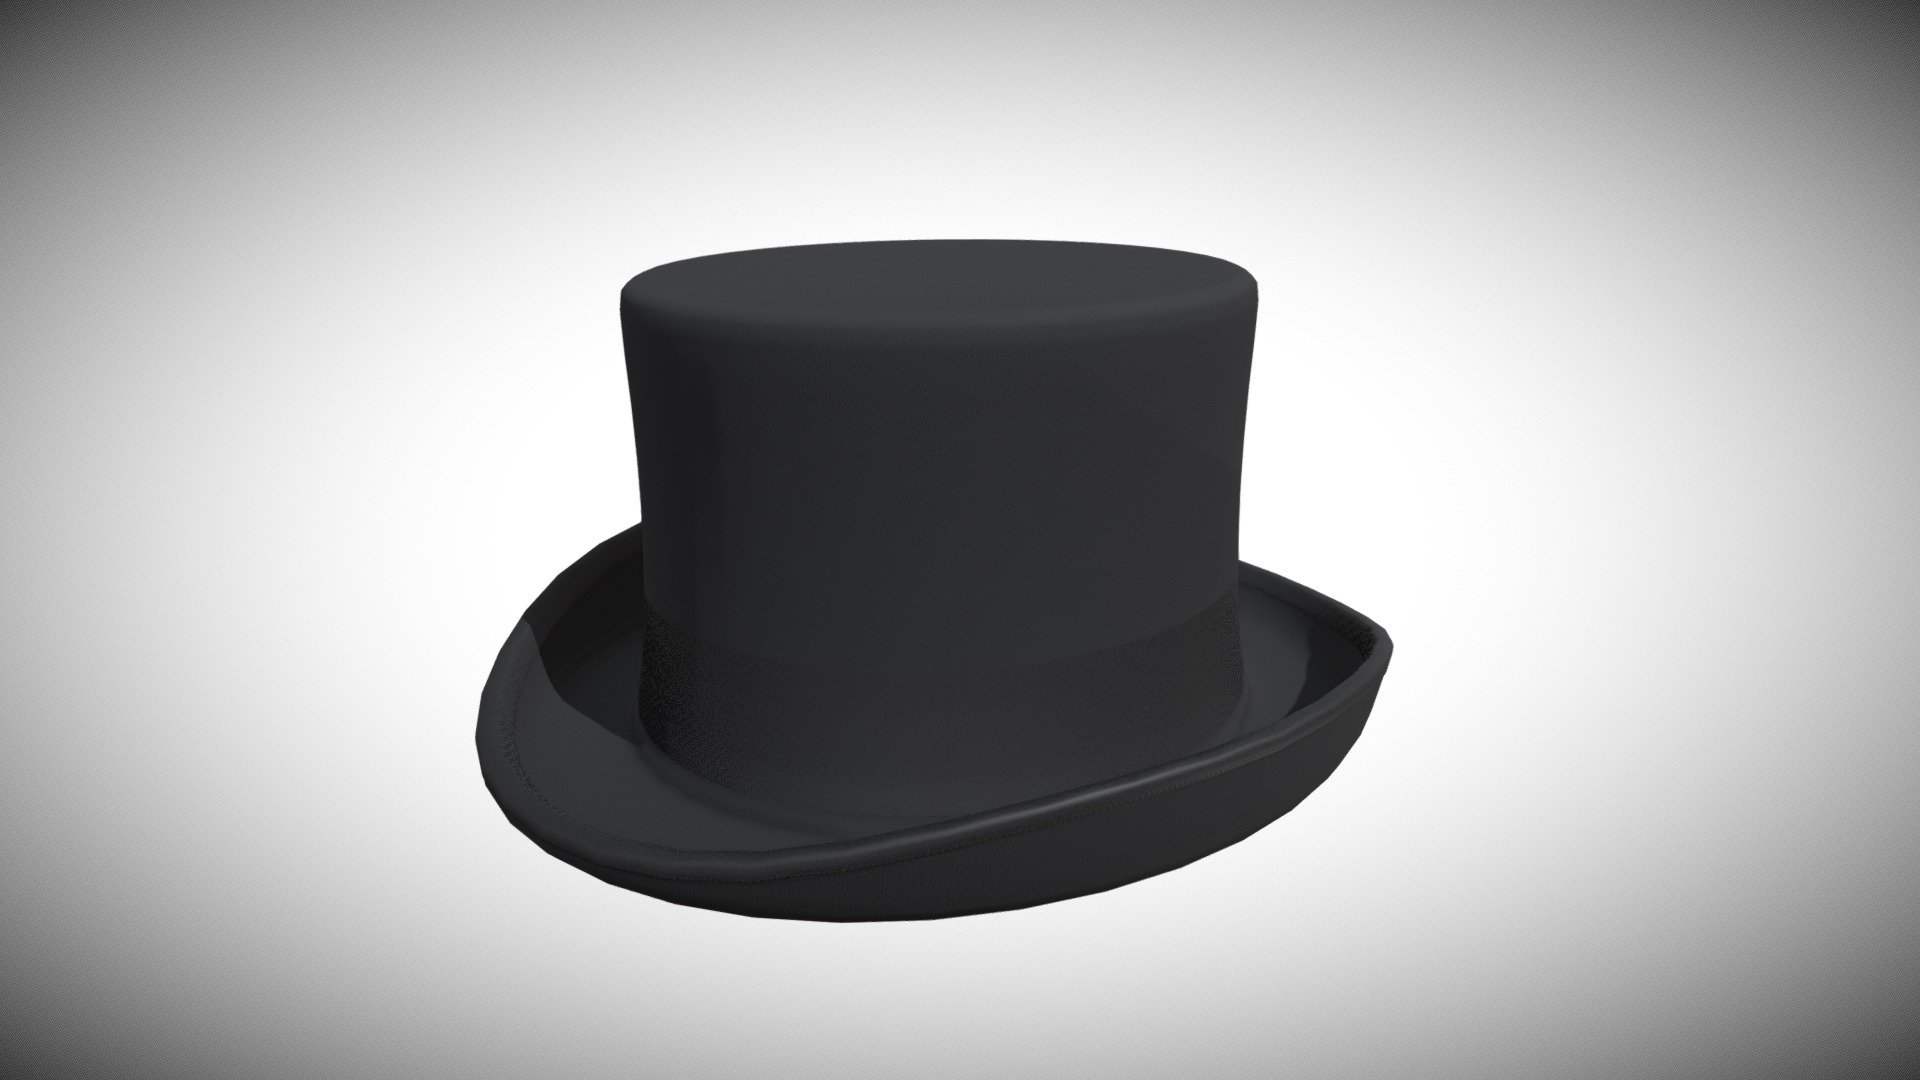 Cylinder hat or Top hat.

Highpoly 3D Model.

High quality Textures 4096x4096.

Created in Maya 2018, textured in Substance Painter 2018.

**

If you have some question, feel free to ask - frieddy@gmail.com - Cylinder Hat (Topper) - 3D model by ijichi 3d model